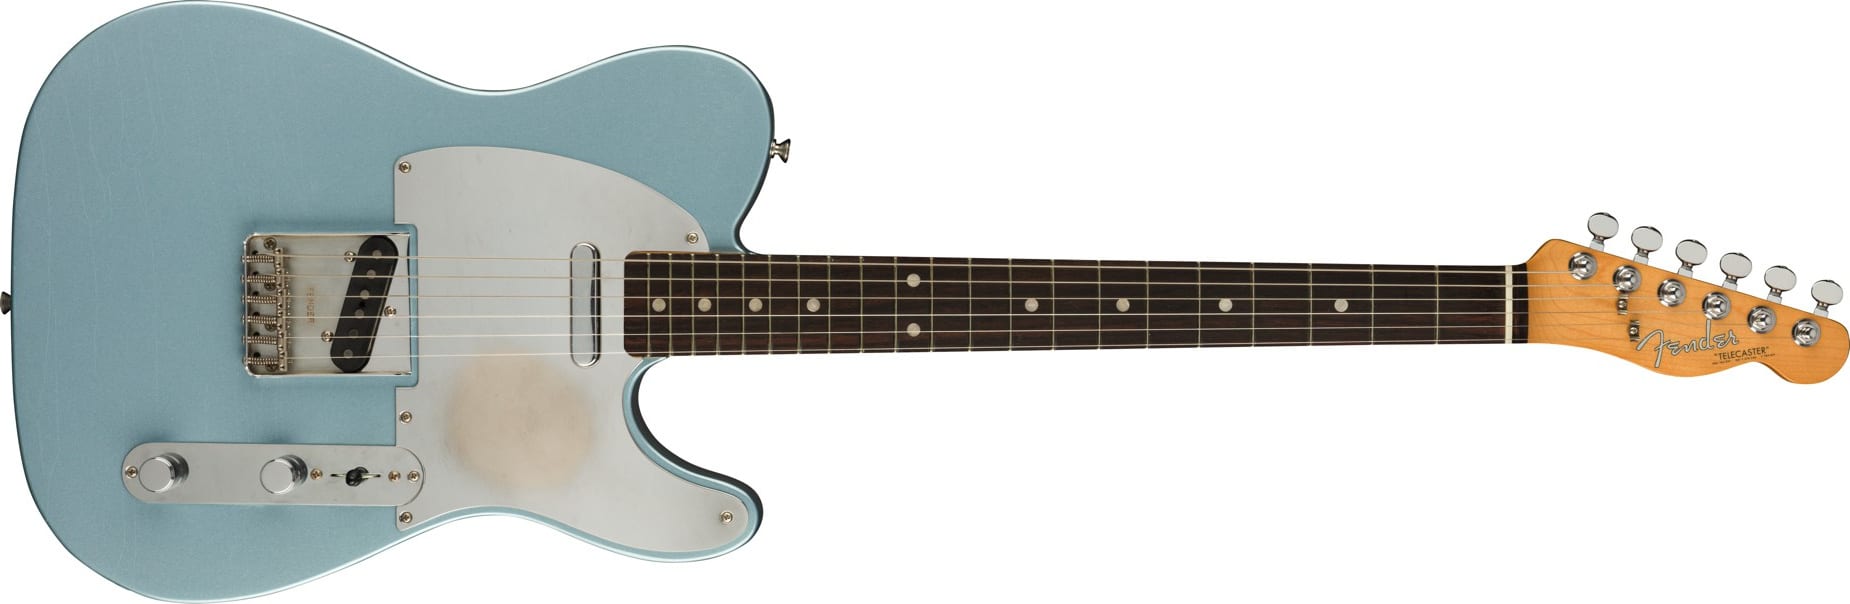 Fender launches vintage-spec, aged signature Telecaster for Chrissie Hynde